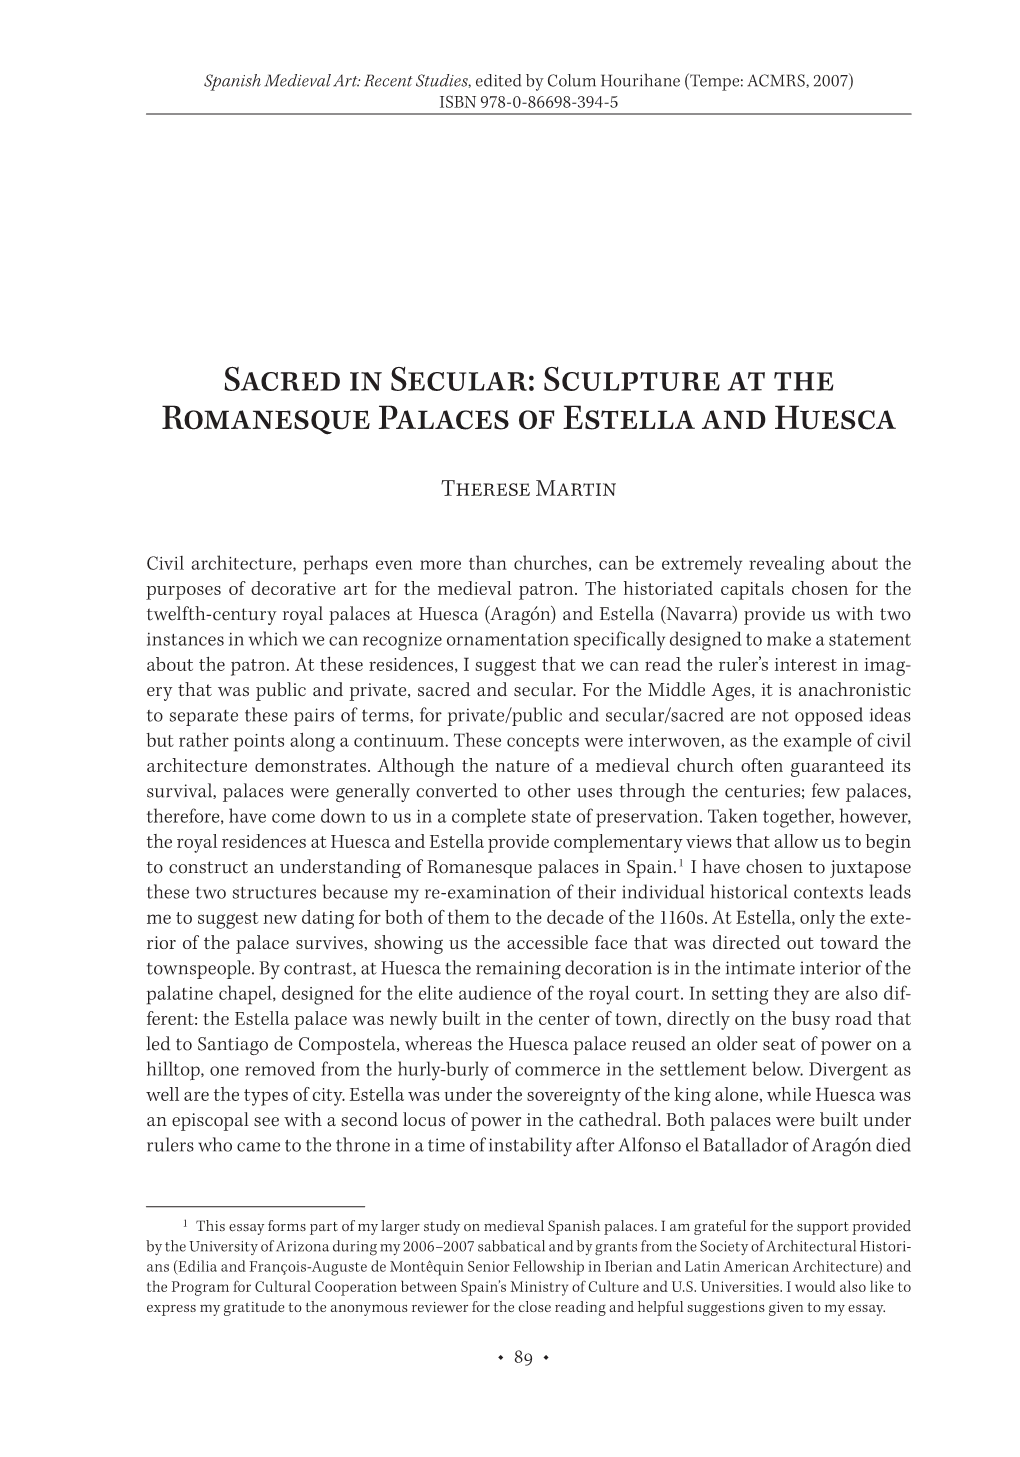 Sacred in Secular: Sculpture at the Romanesque Palaces of Estella and Huesca